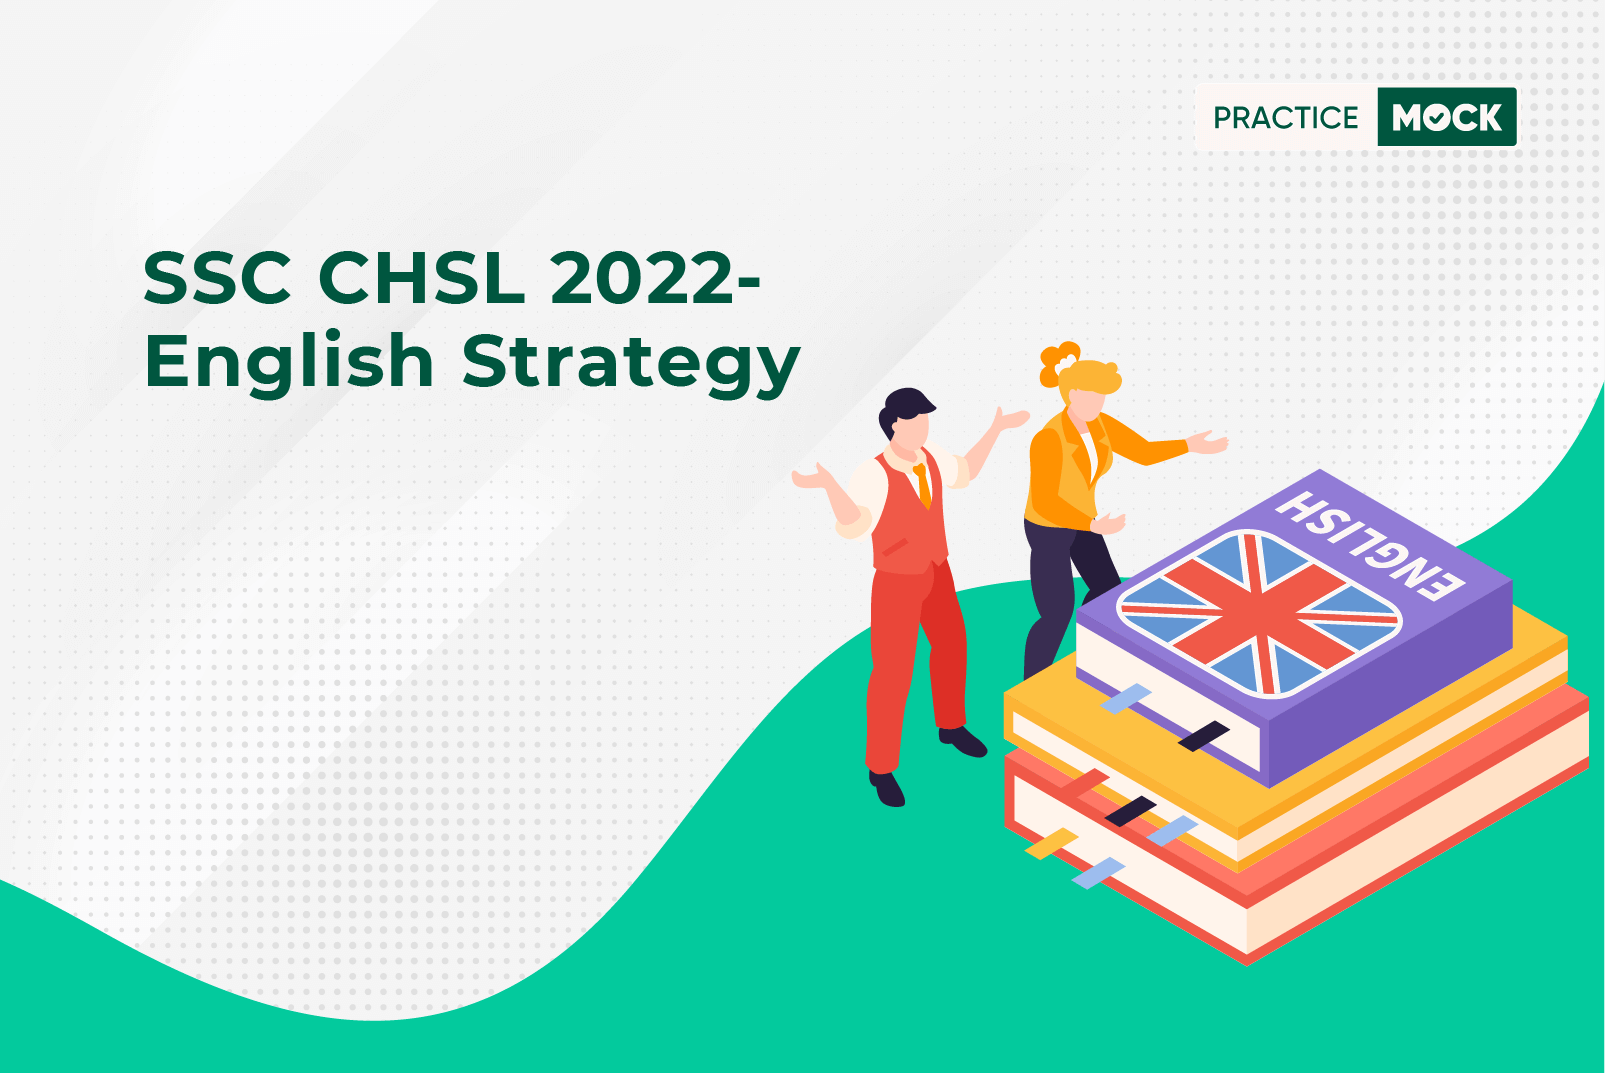 SSC CHSL 2022-How to Score Maximum Marks in English?